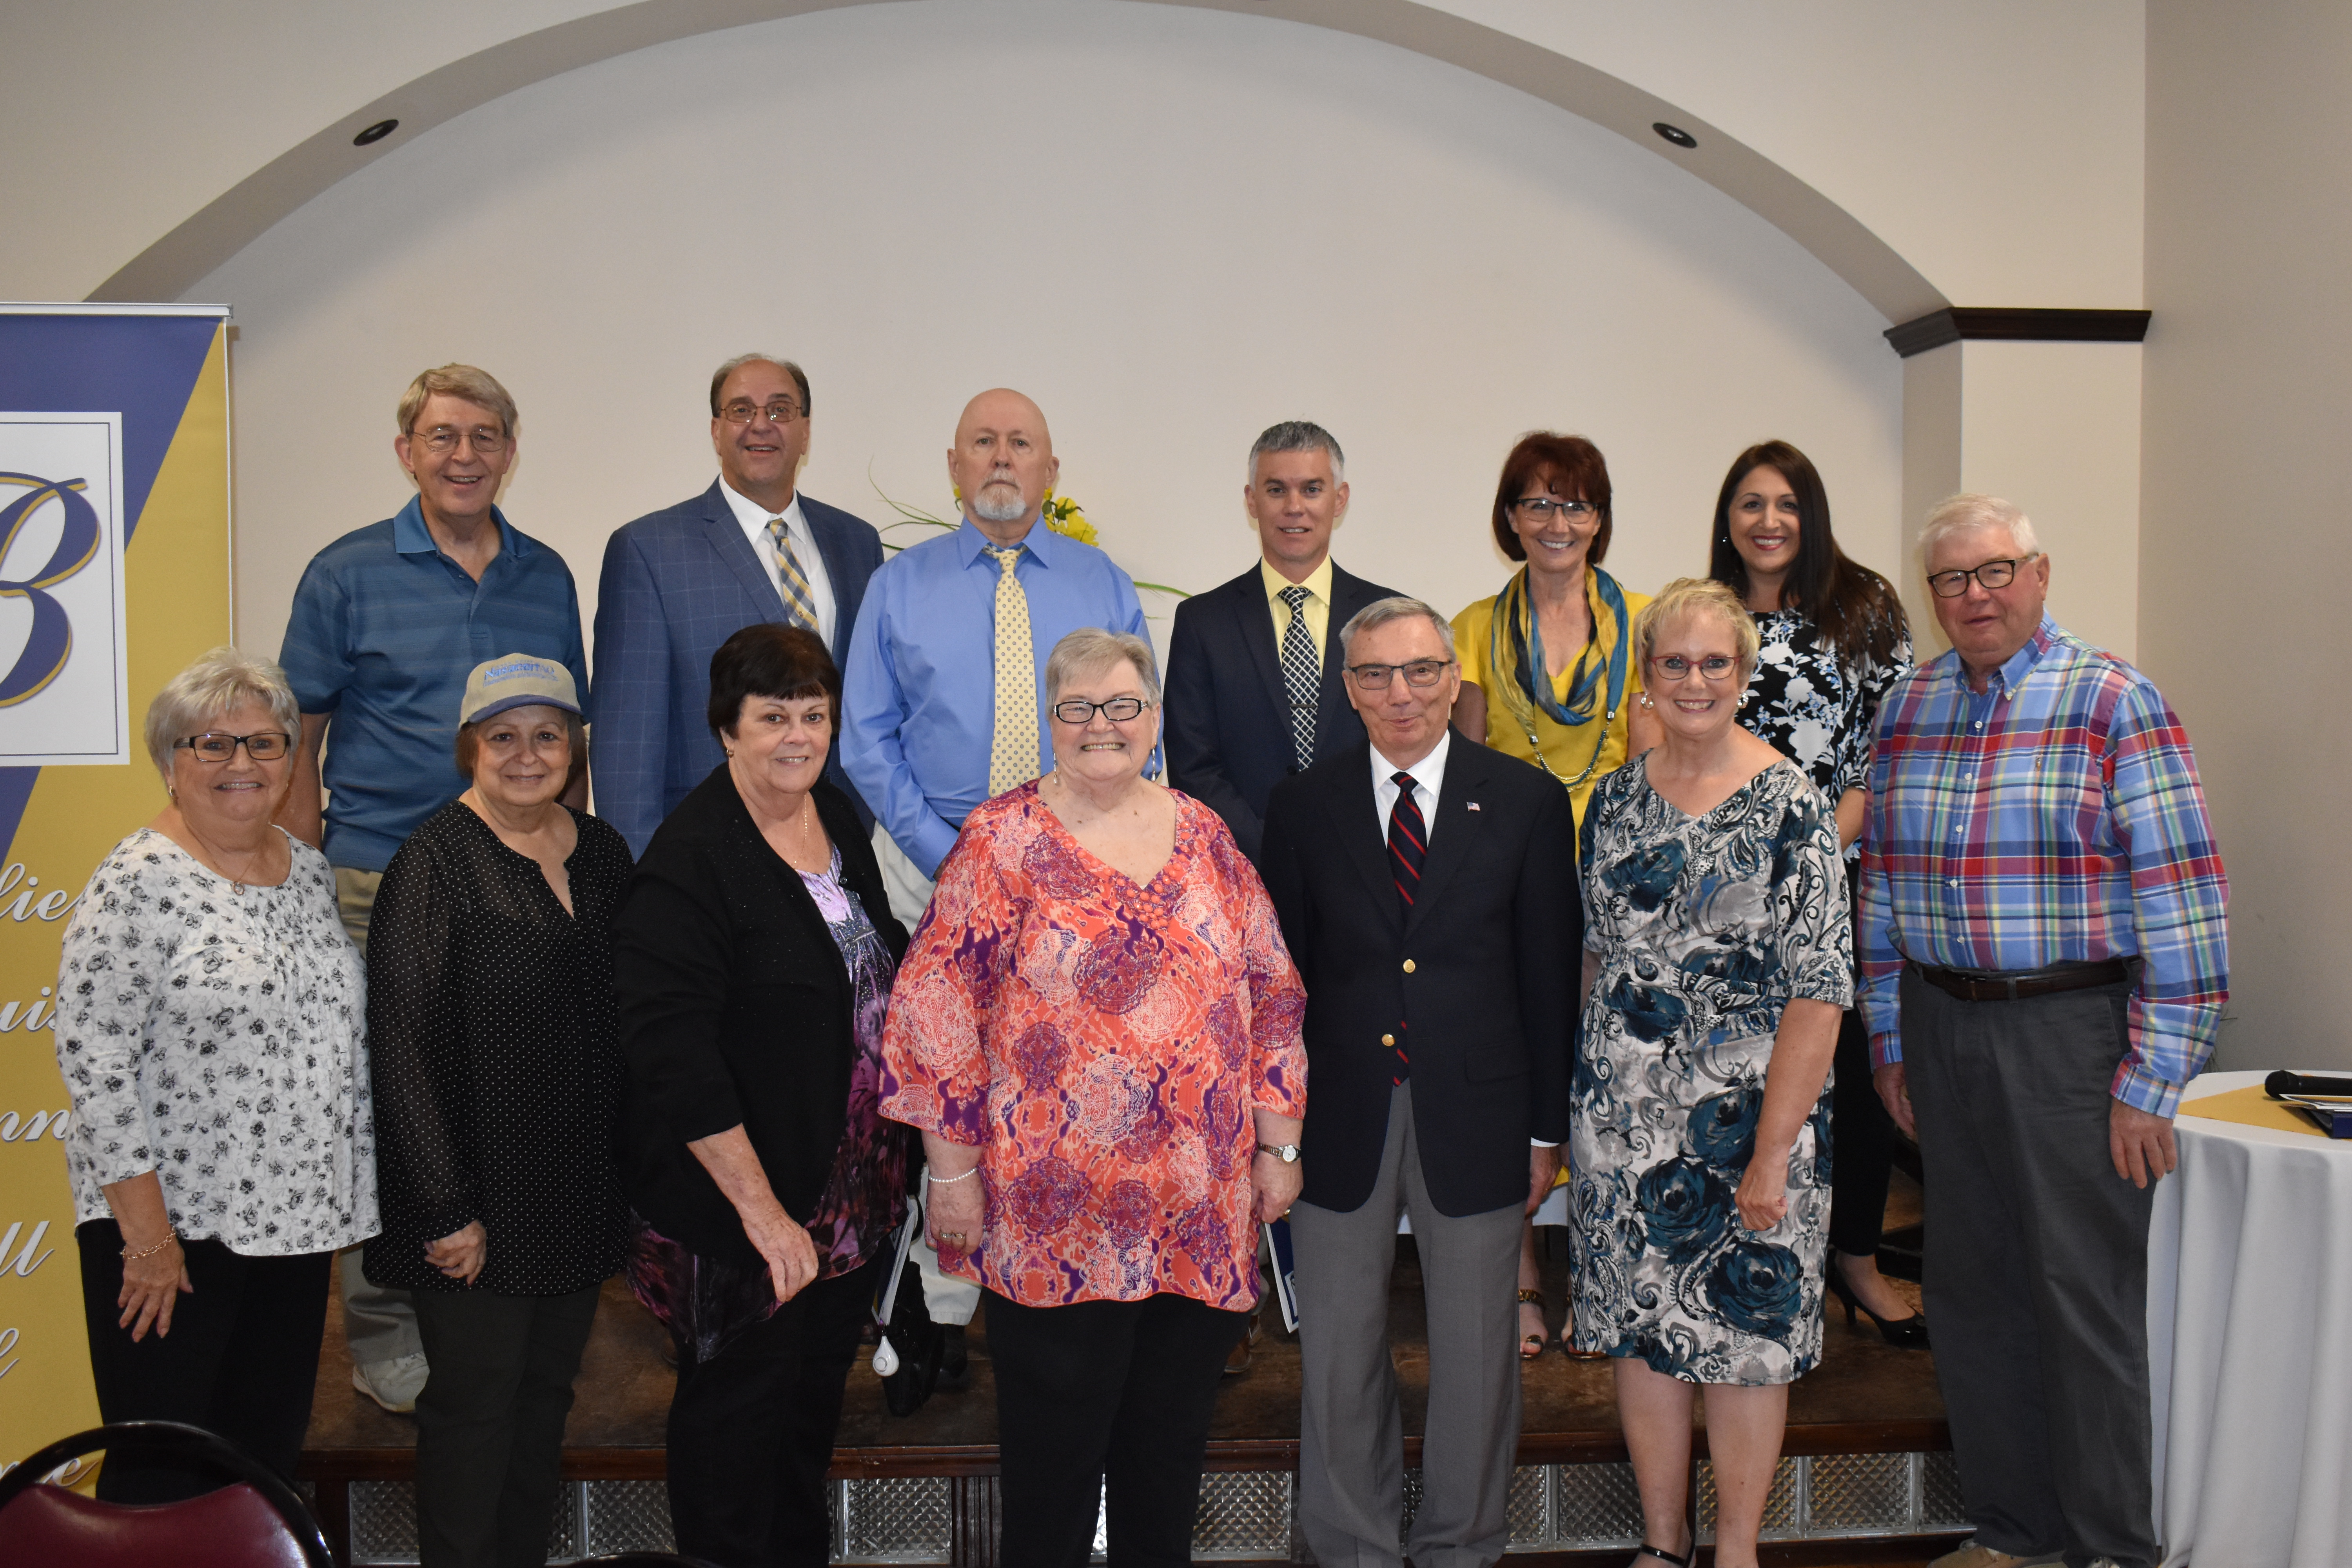 Members of the Brookfield Distinguished Alumni Hall of Fame Committee are, front row, from left: Sandy Sydlowski, Charlotte Sirianni, Betty Shafer, Jean Kozarich, Daniel Deramo, Diane Riefstahl and Ernest Falhamer. Back row, from left, James Hoffman III, Robert Kozar, Toby Gibson, Velina Jo Taylor and Kristen Foster.